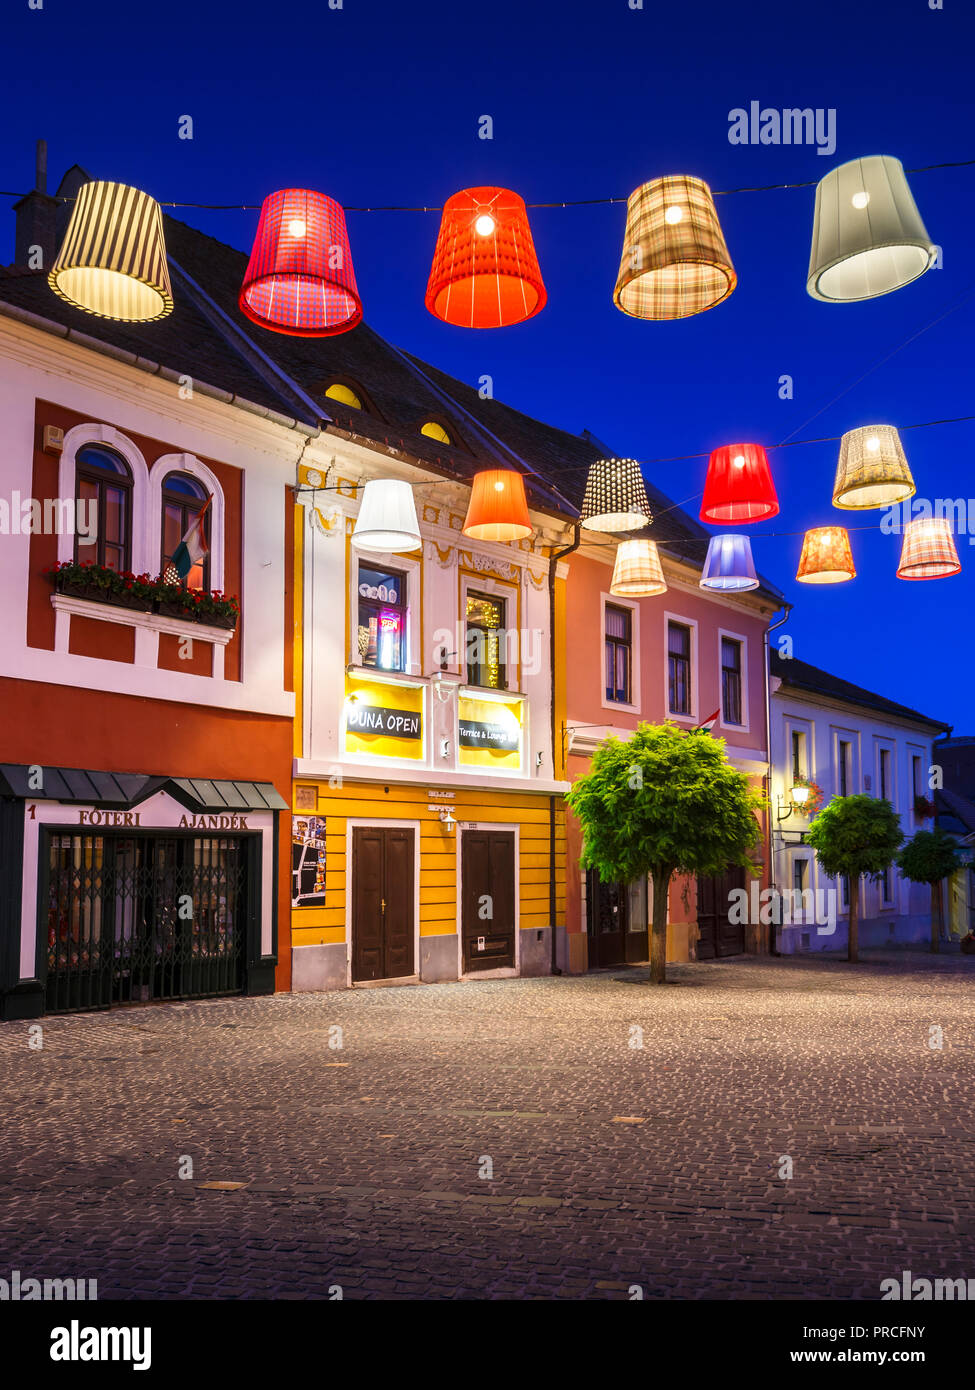 Szentendre, Hungary - August 17, 2018: Colourful shops in the old town of Szentendre in Hungary. Stock Photo